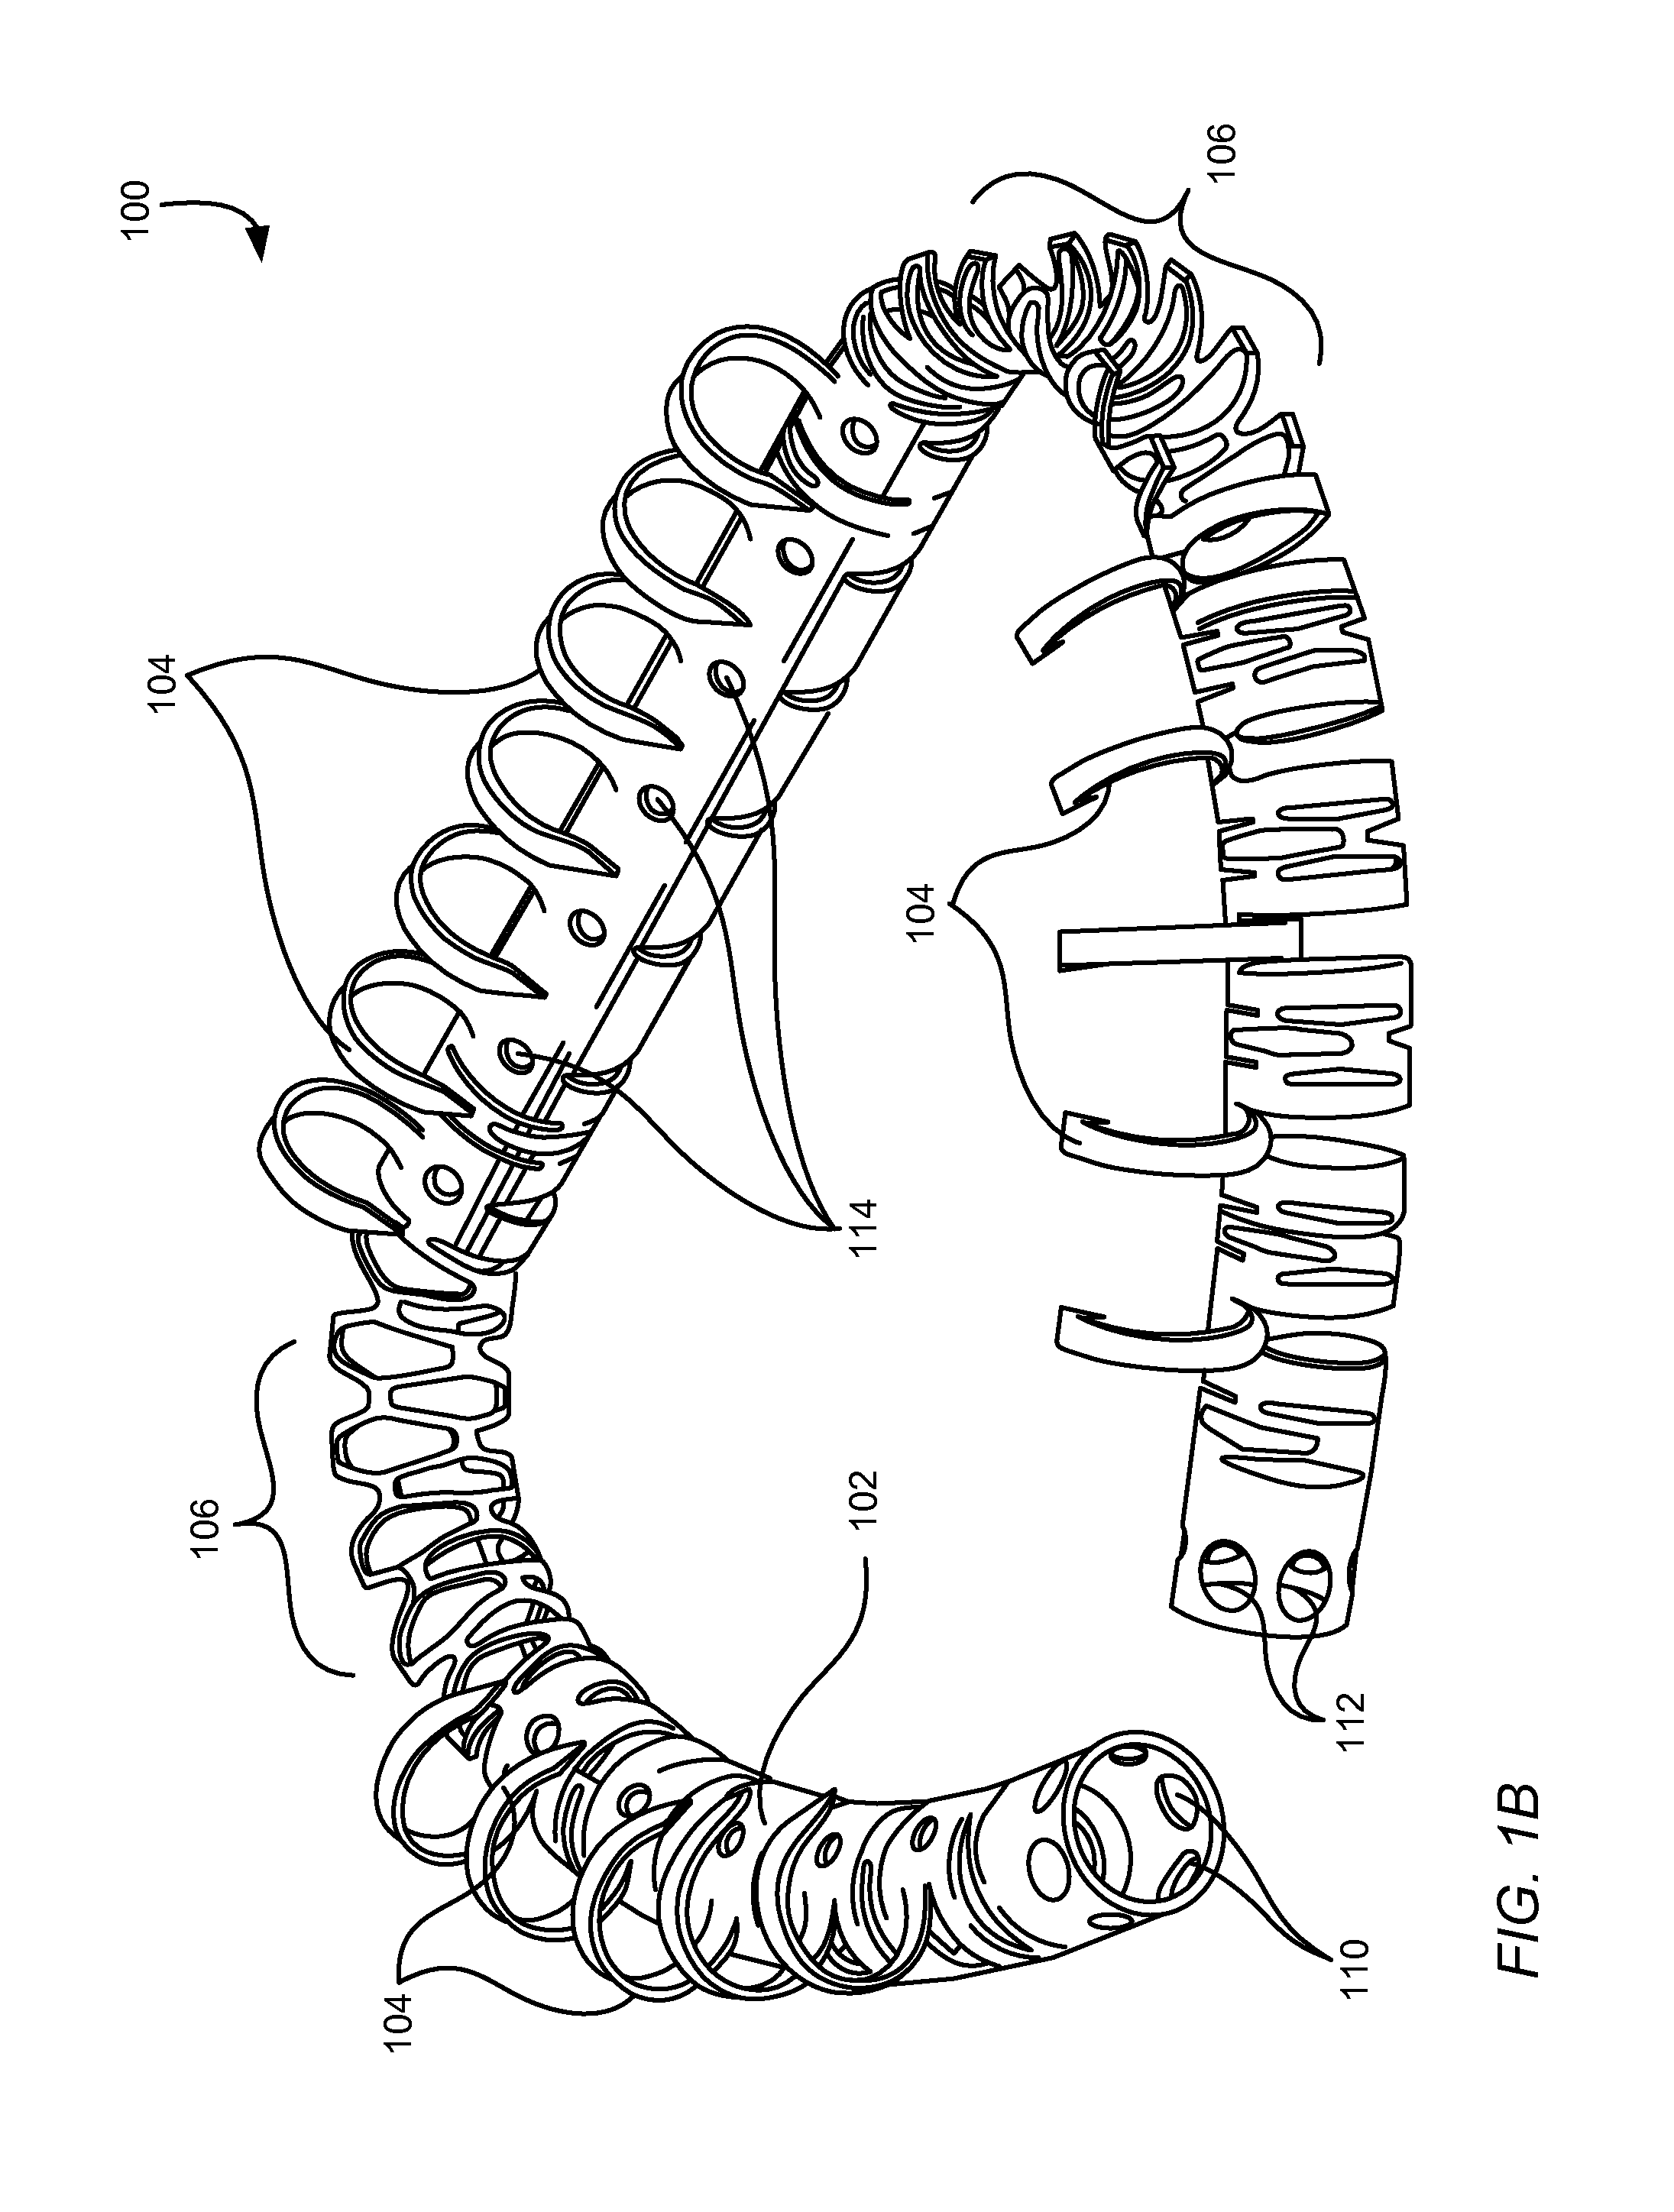 Methods, devices, and systems for percutaneously anchoring annuloplasty rings